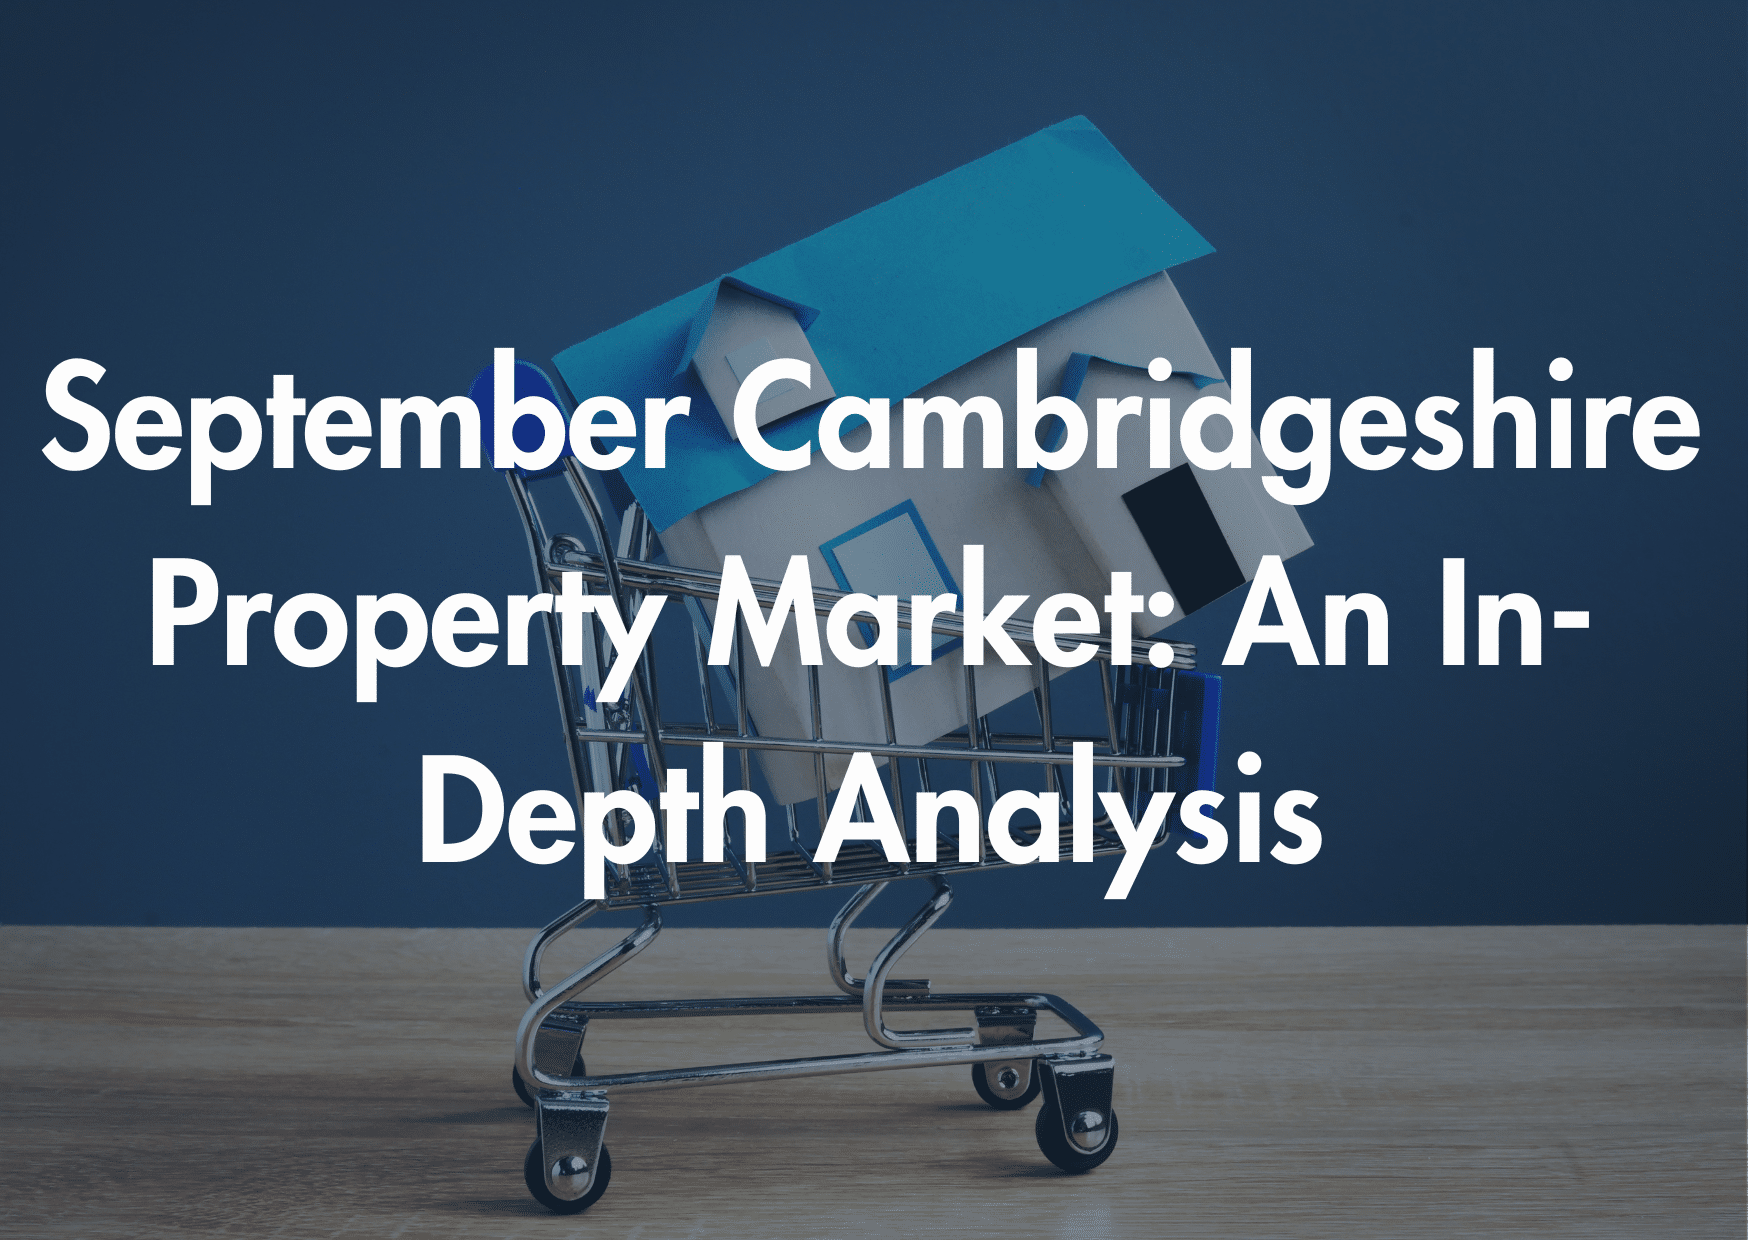 Navigating the Huntingdon and Cambridgeshire Property Market: An In-Depth Analysis